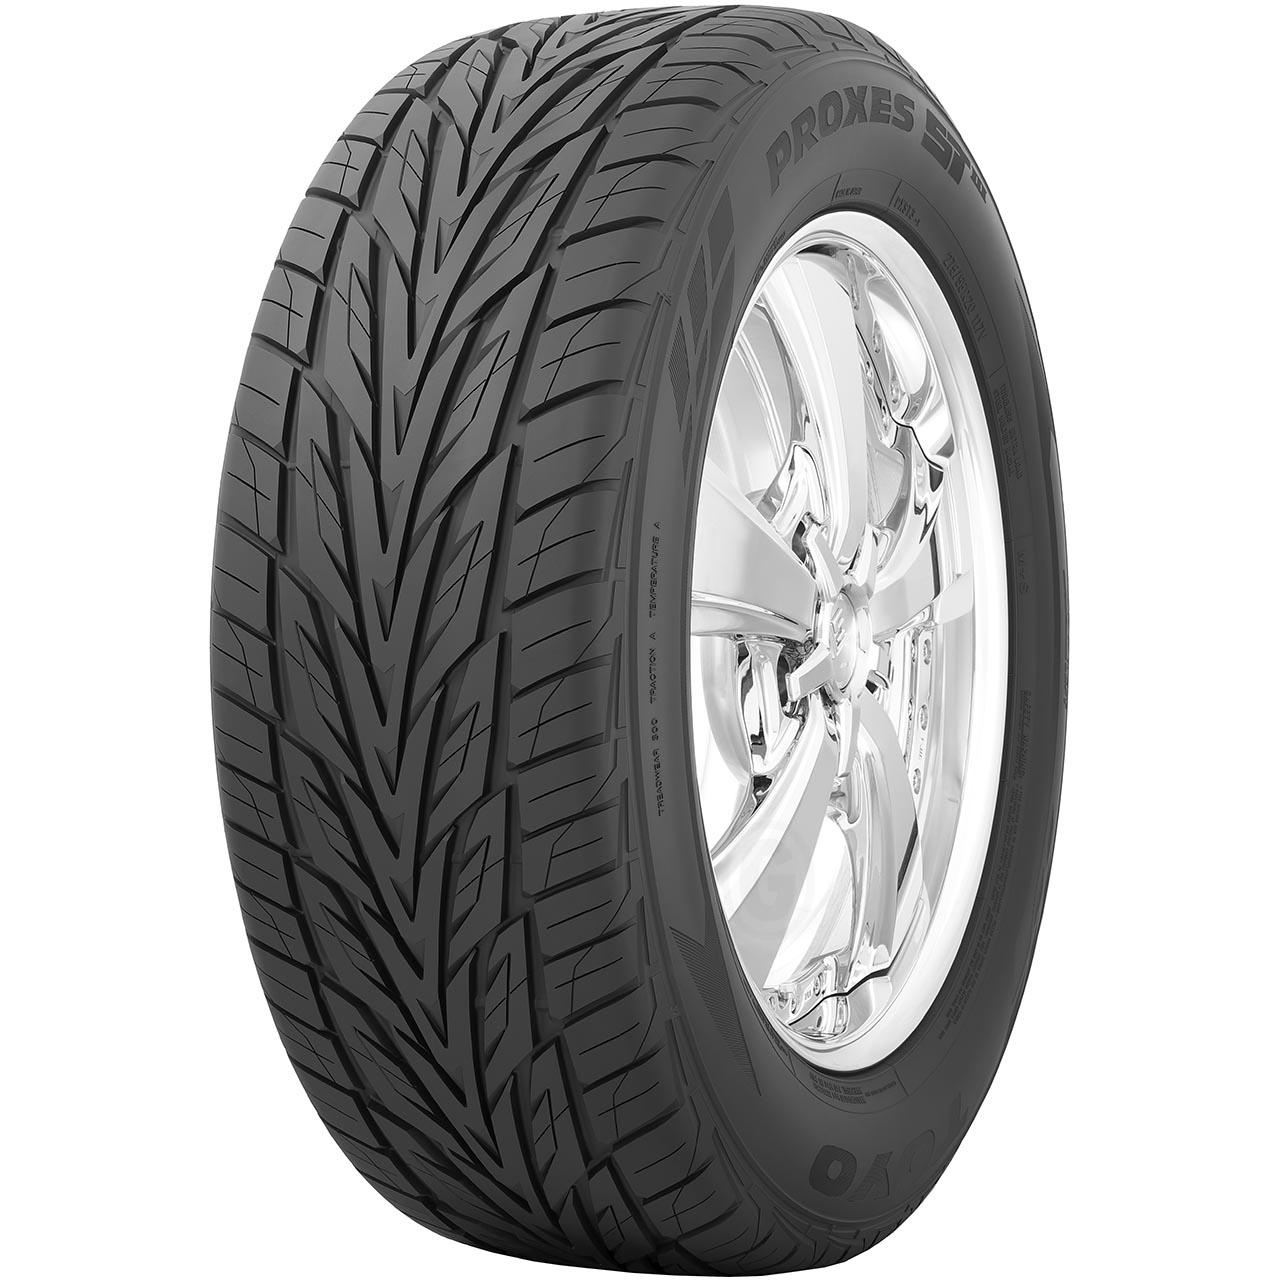 TOYO PROXES S/T III 275/55R20 117V